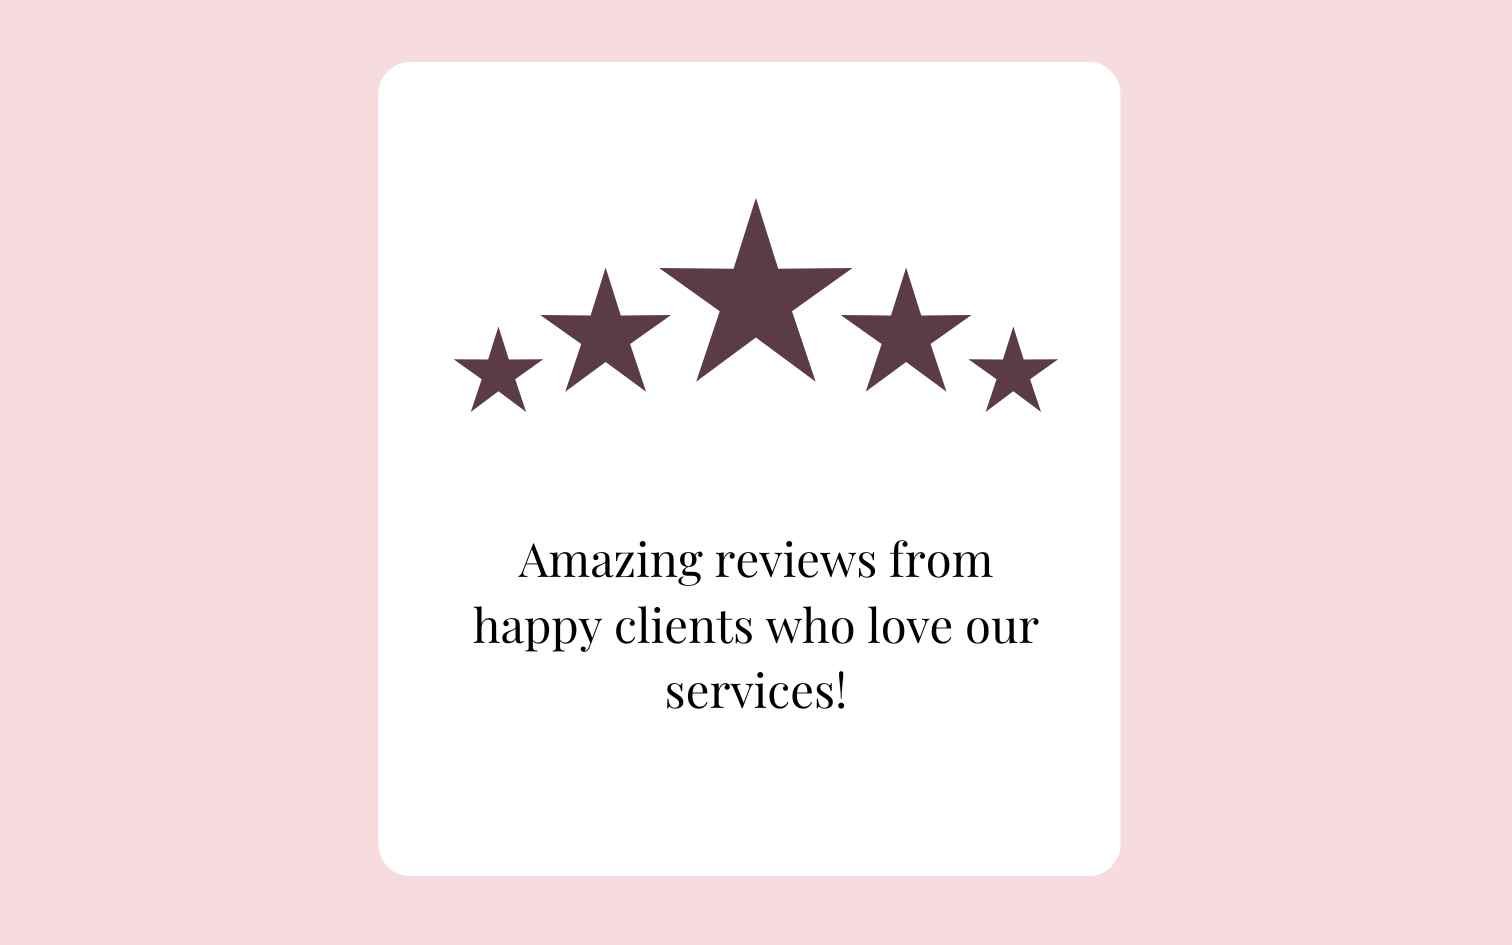 Amazing reviews from happy clients who love our services!